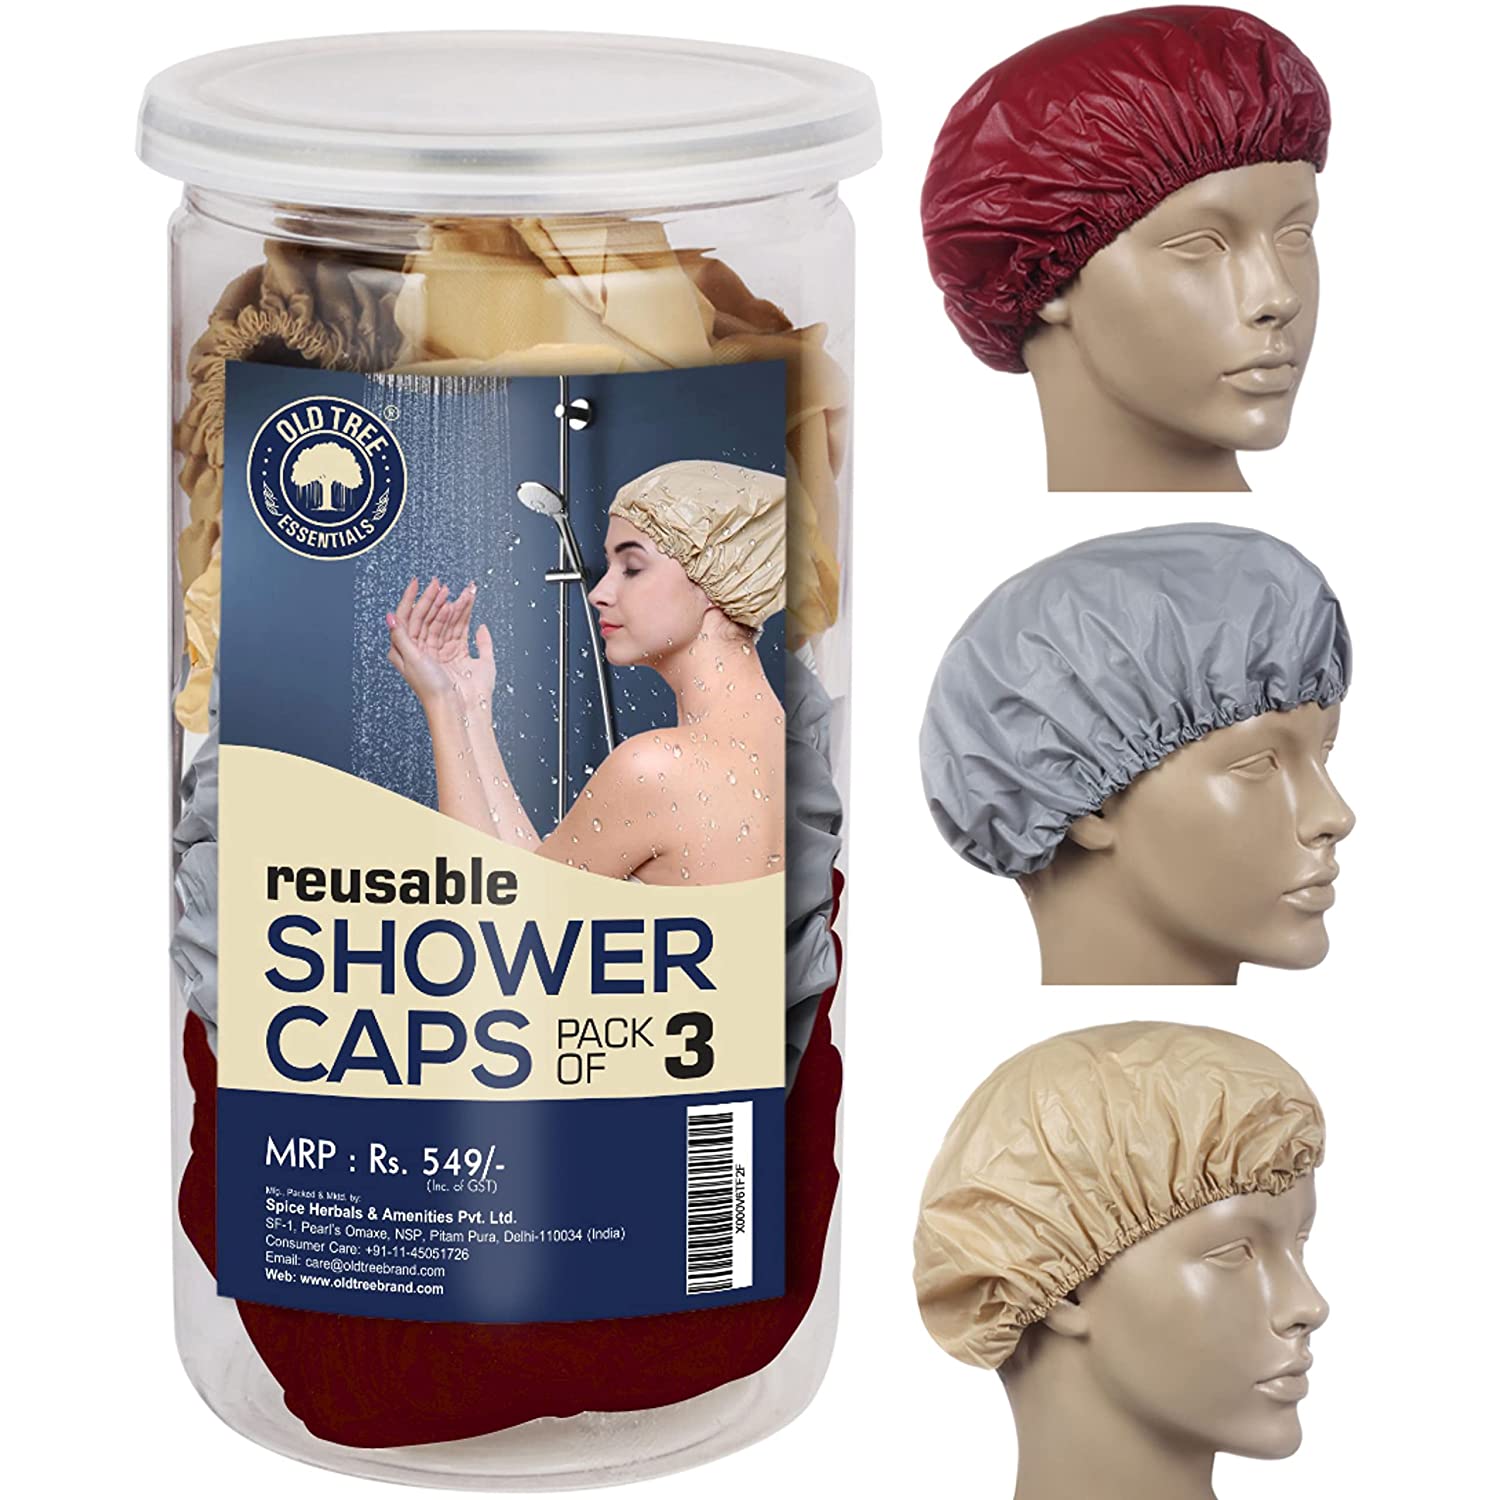 old-tree-reusable-shower-cap